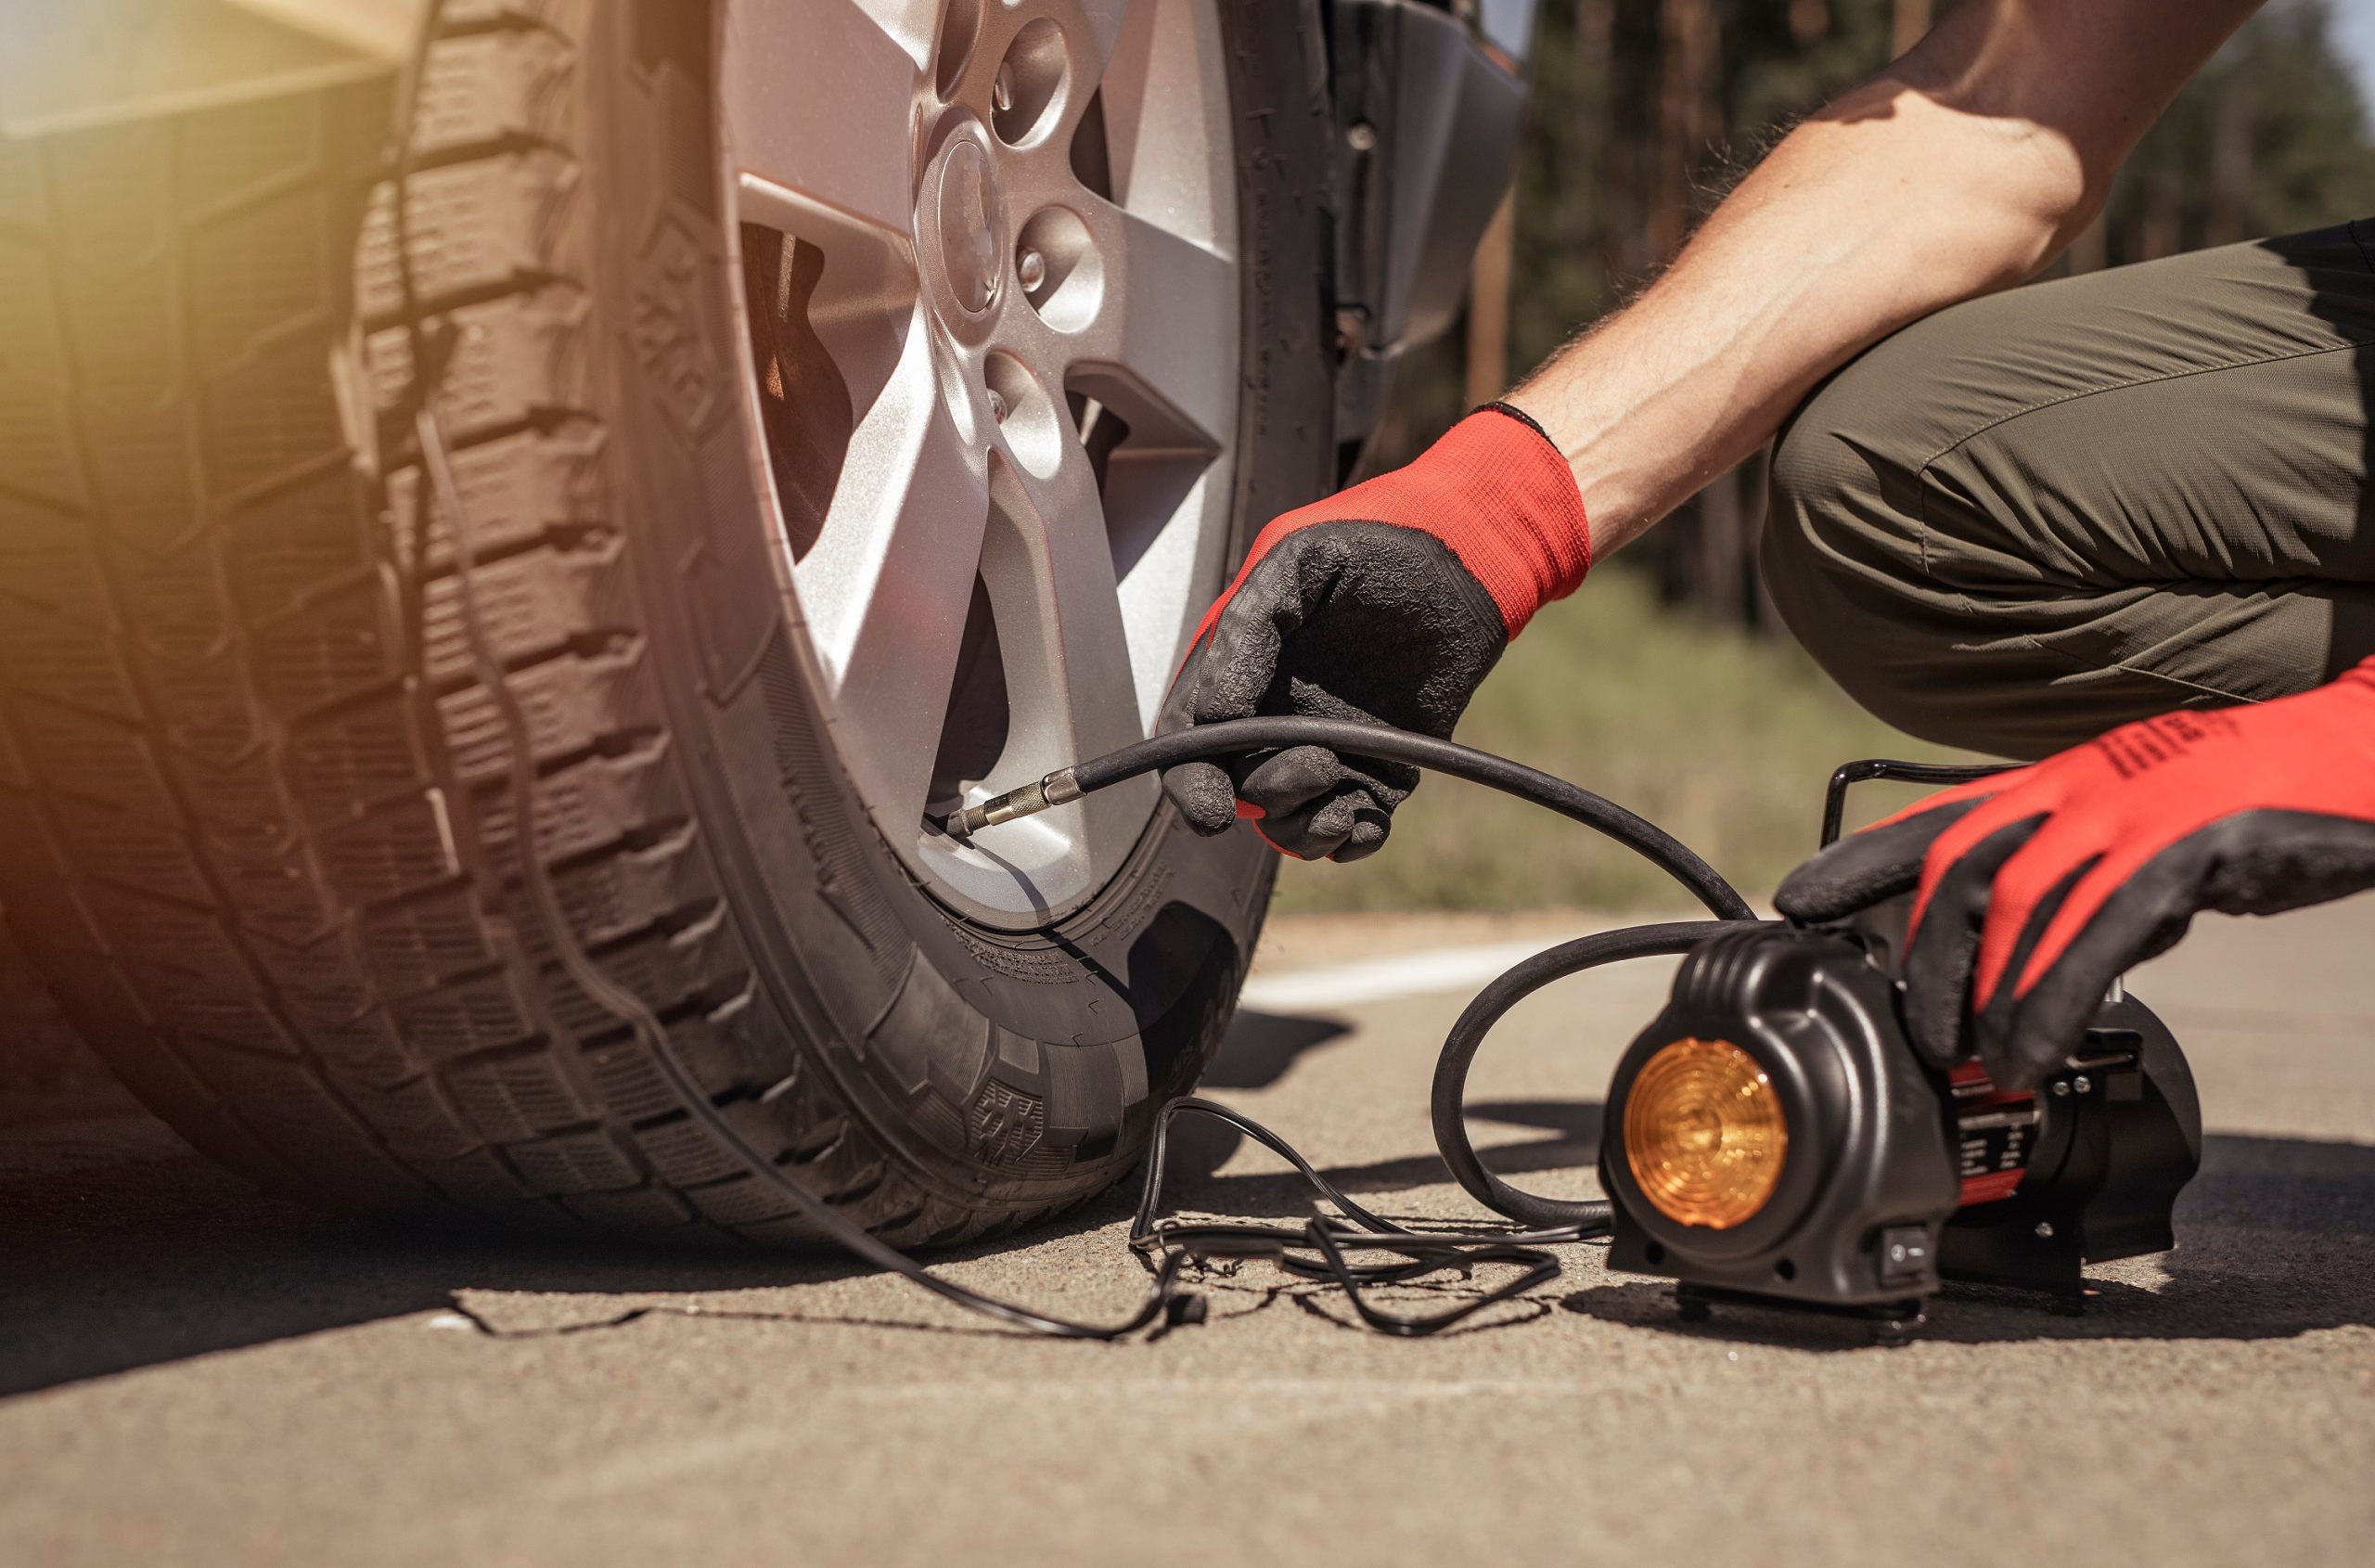 The 10 Best Tire Inflators of 2023